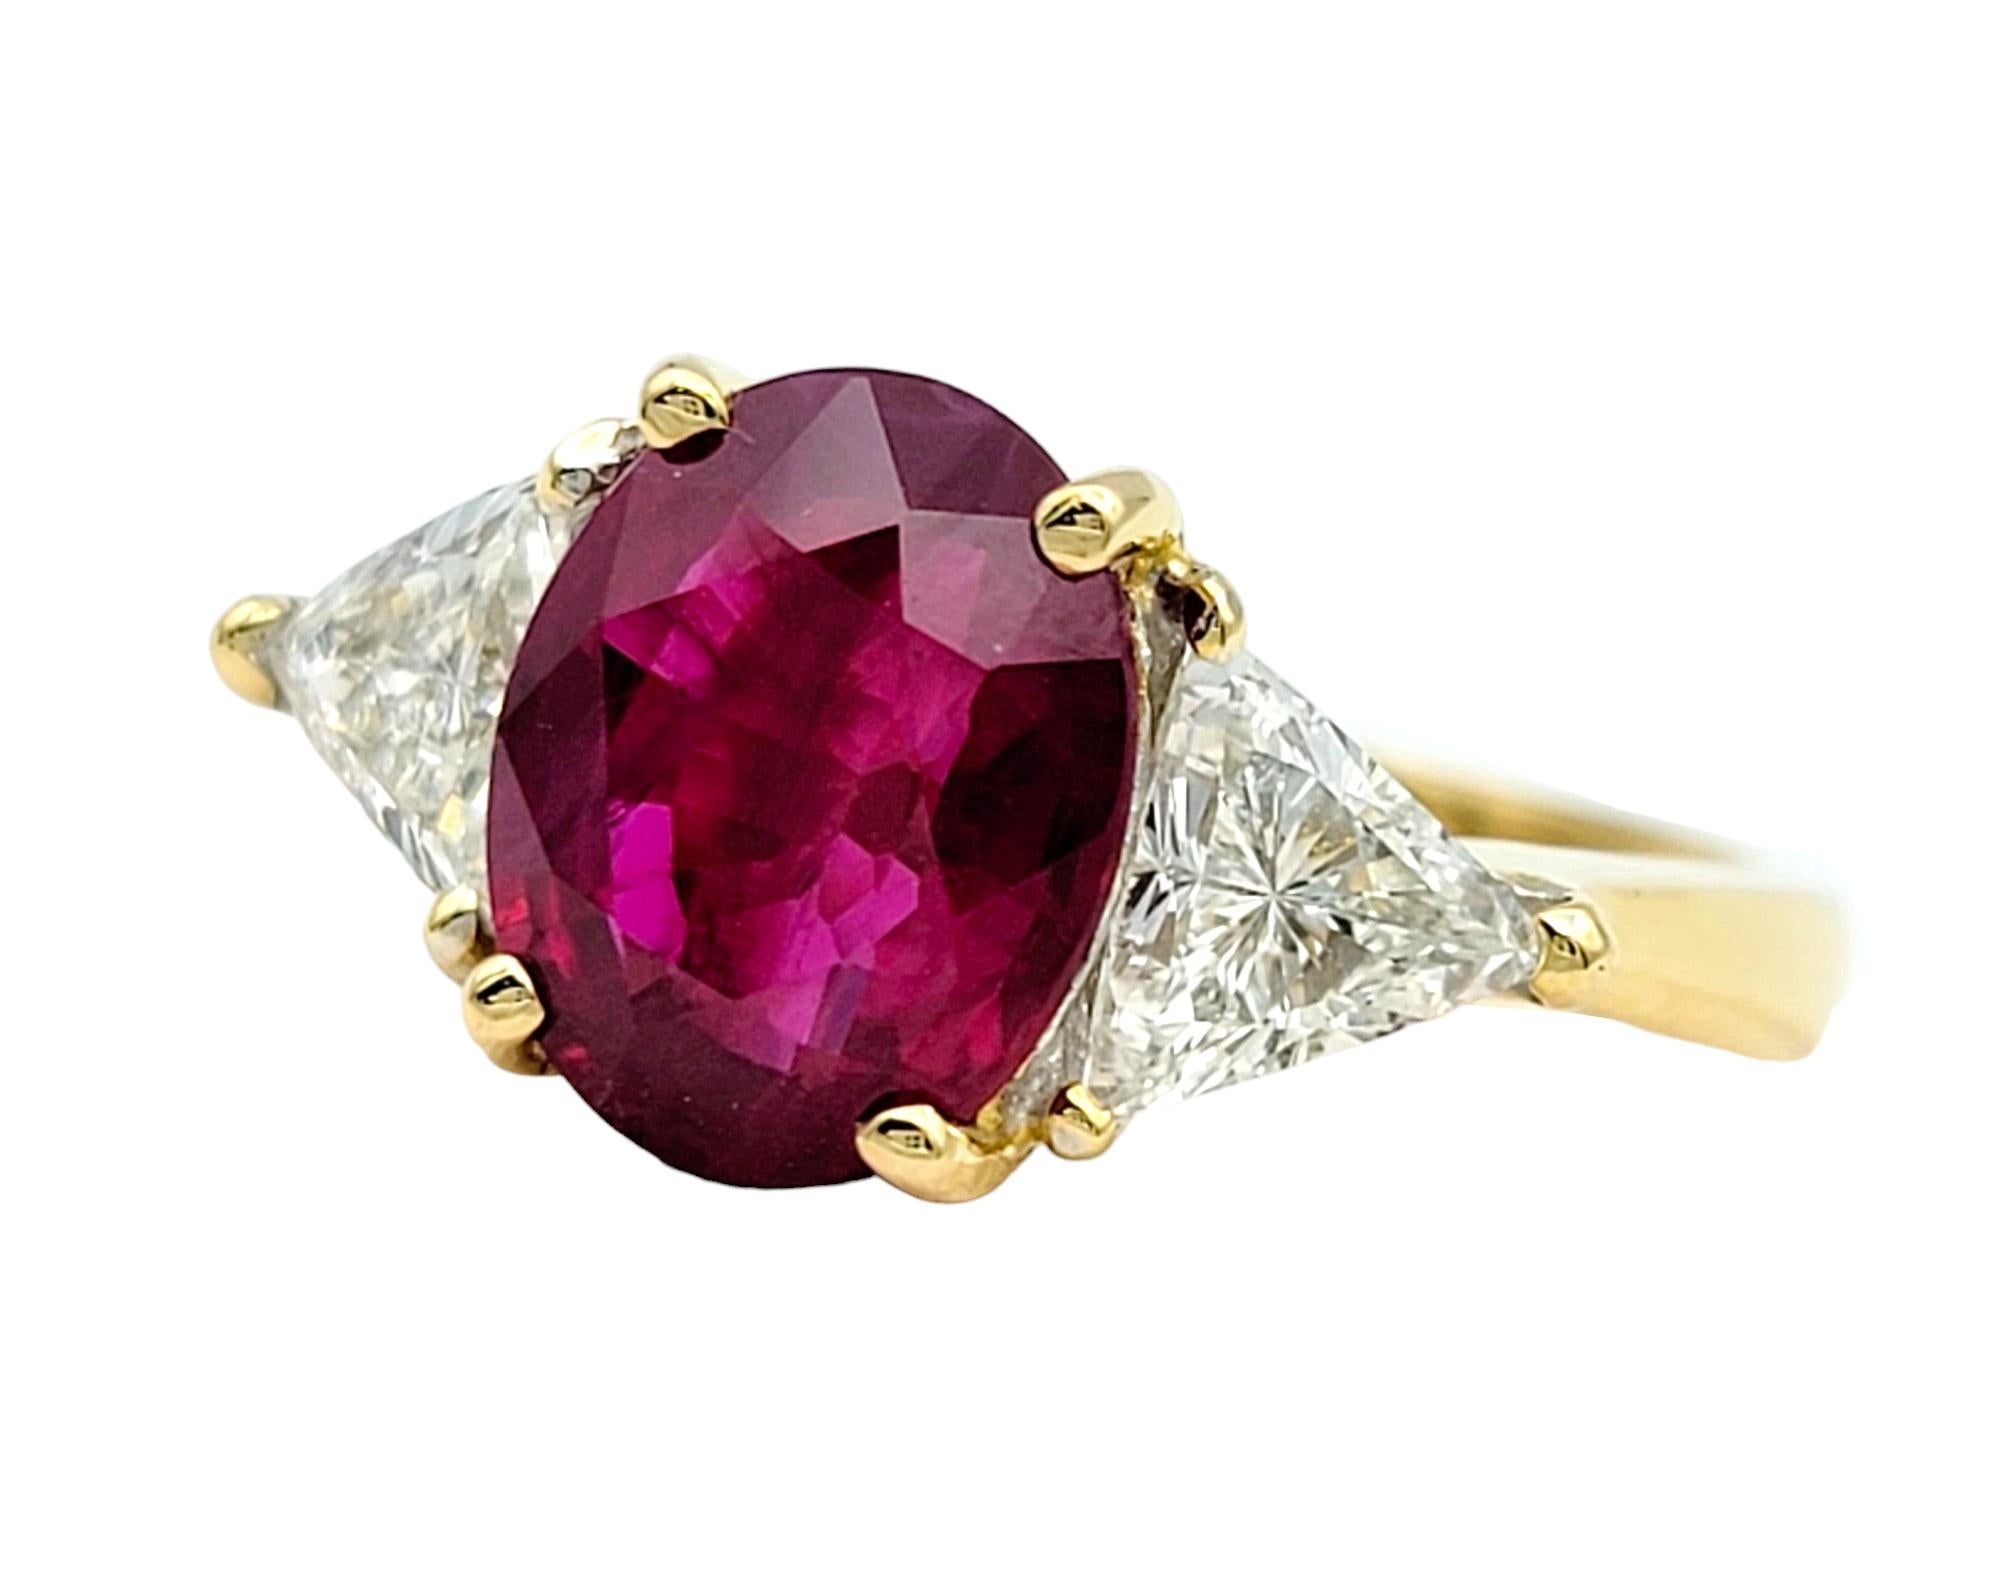 Contemporary Rare Natural Oval Cut Burma Ruby and Trillion Diamond Ring 18 Karat Yellow Gold For Sale